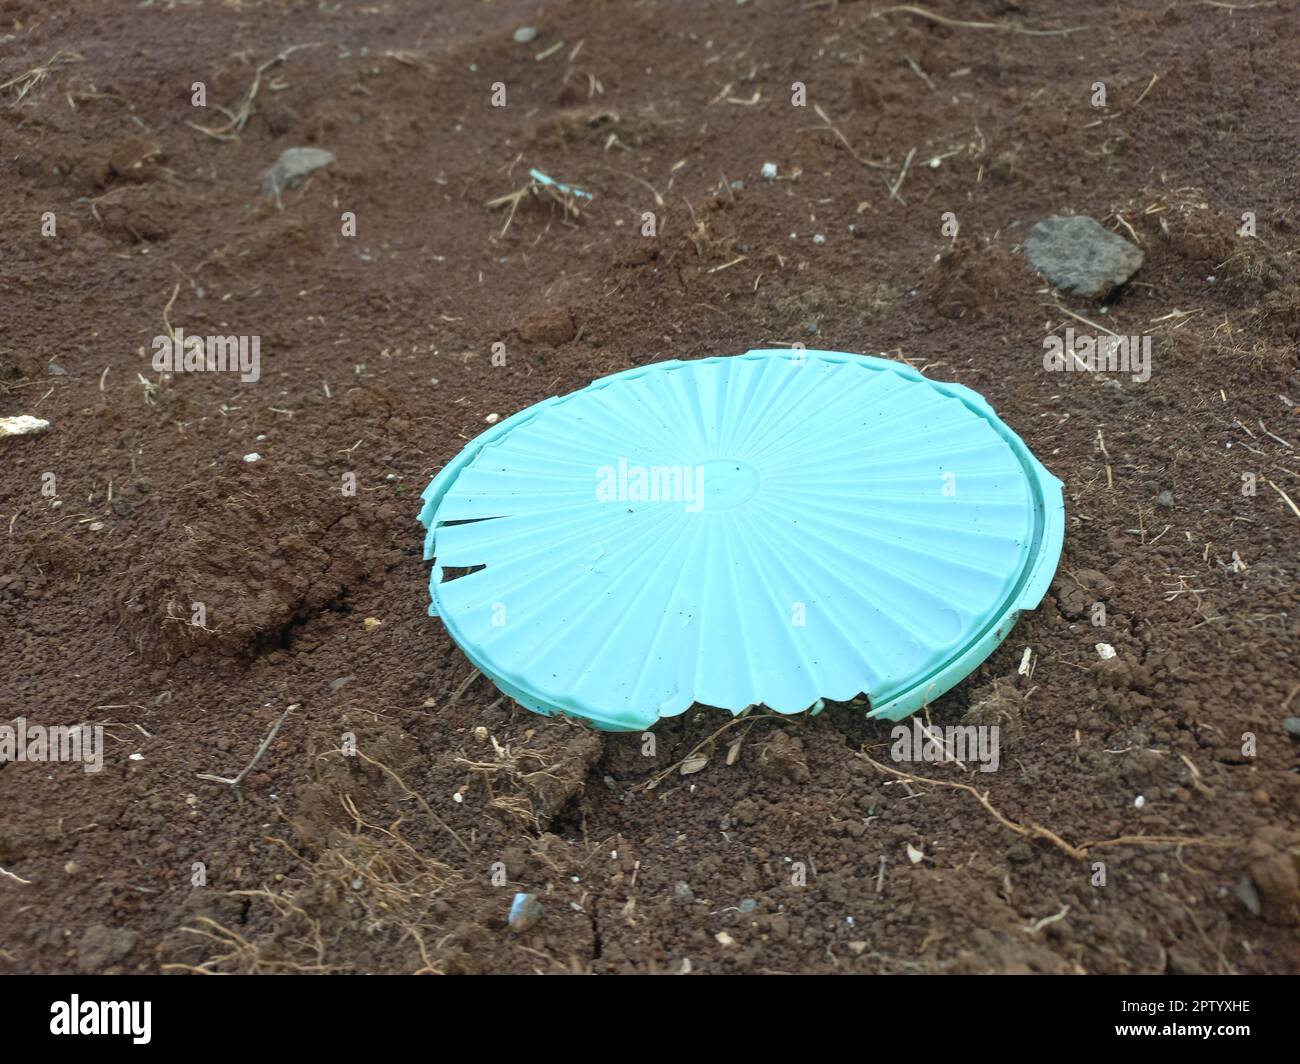 As a result of an unhealthy environment, there is waste of jar lids thrown carelessly on barren land, in bogor Stock Photo